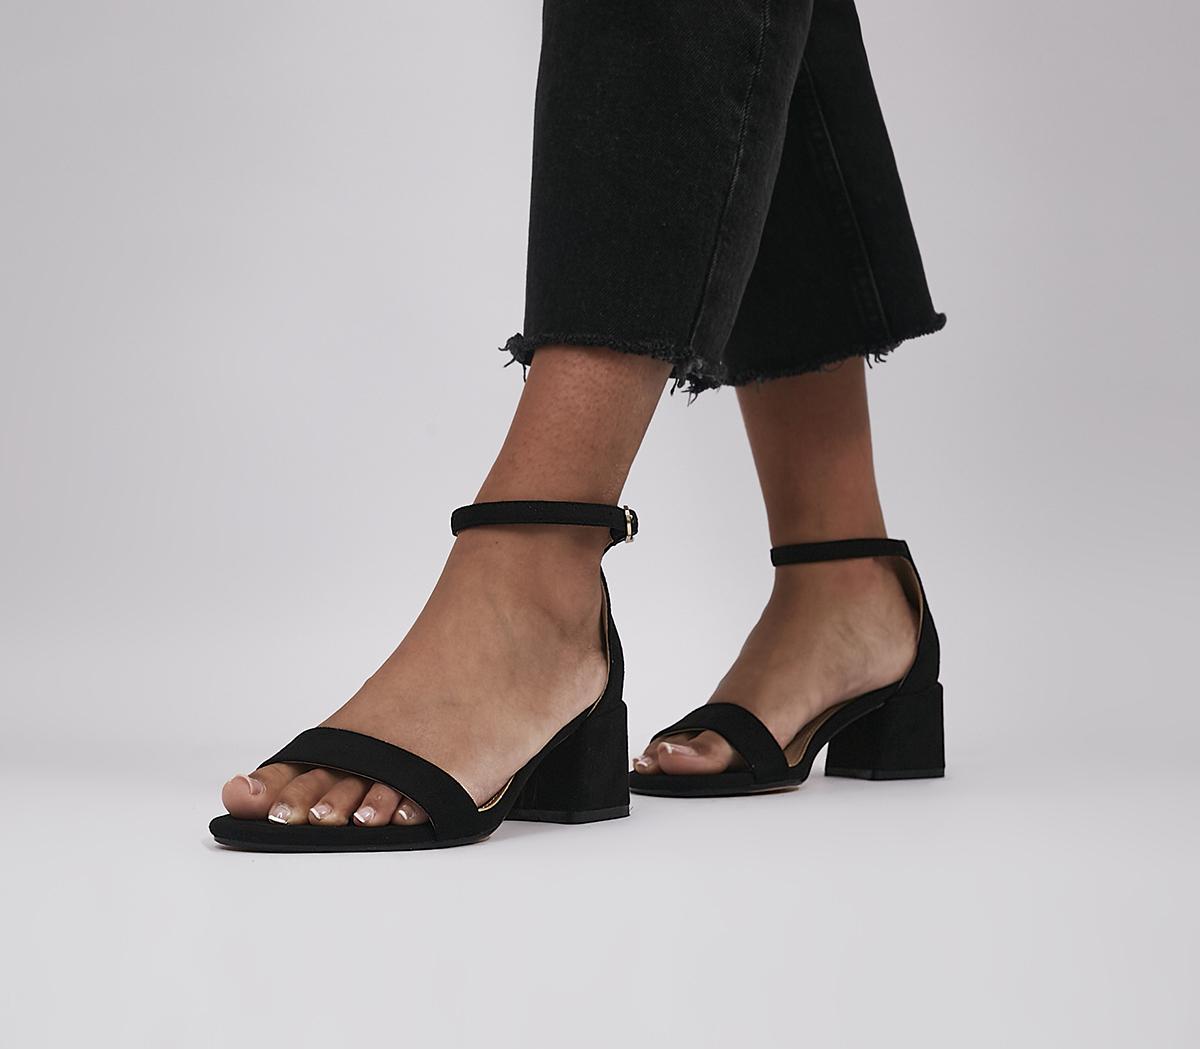 OFFICEWide Fit My Way Two Part SandalsBlack